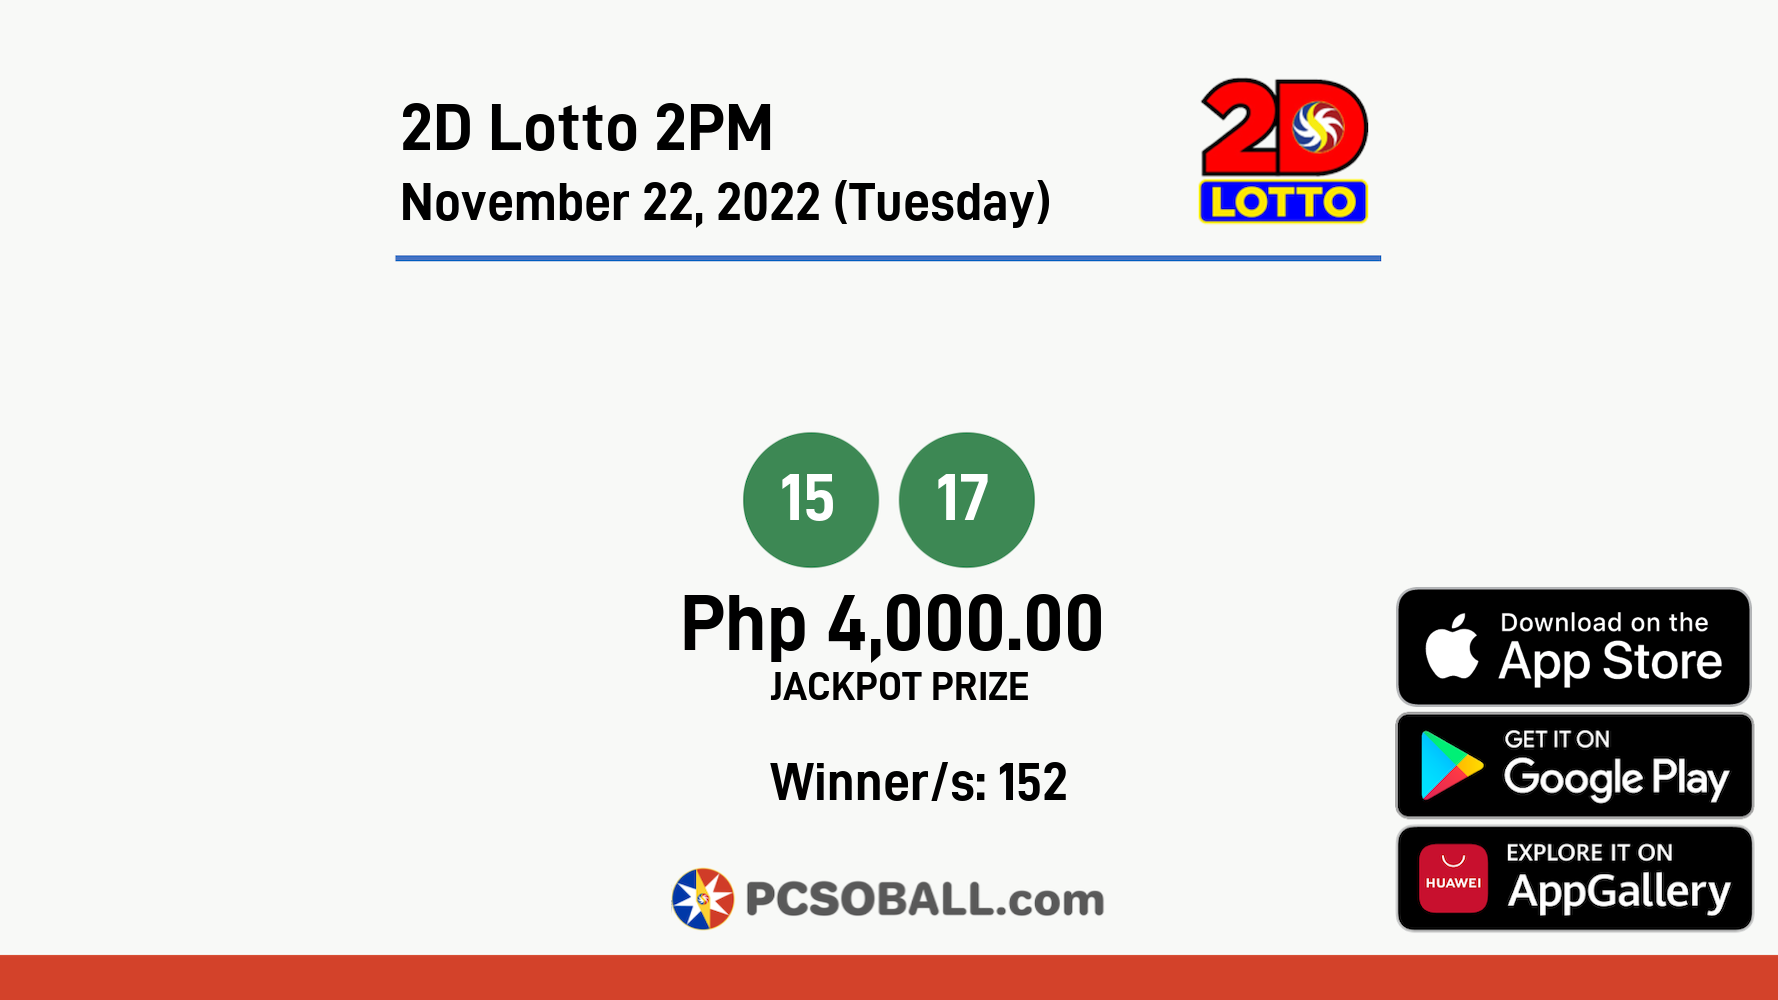 2D Lotto 2PM November 22, 2022 (Tuesday) Result